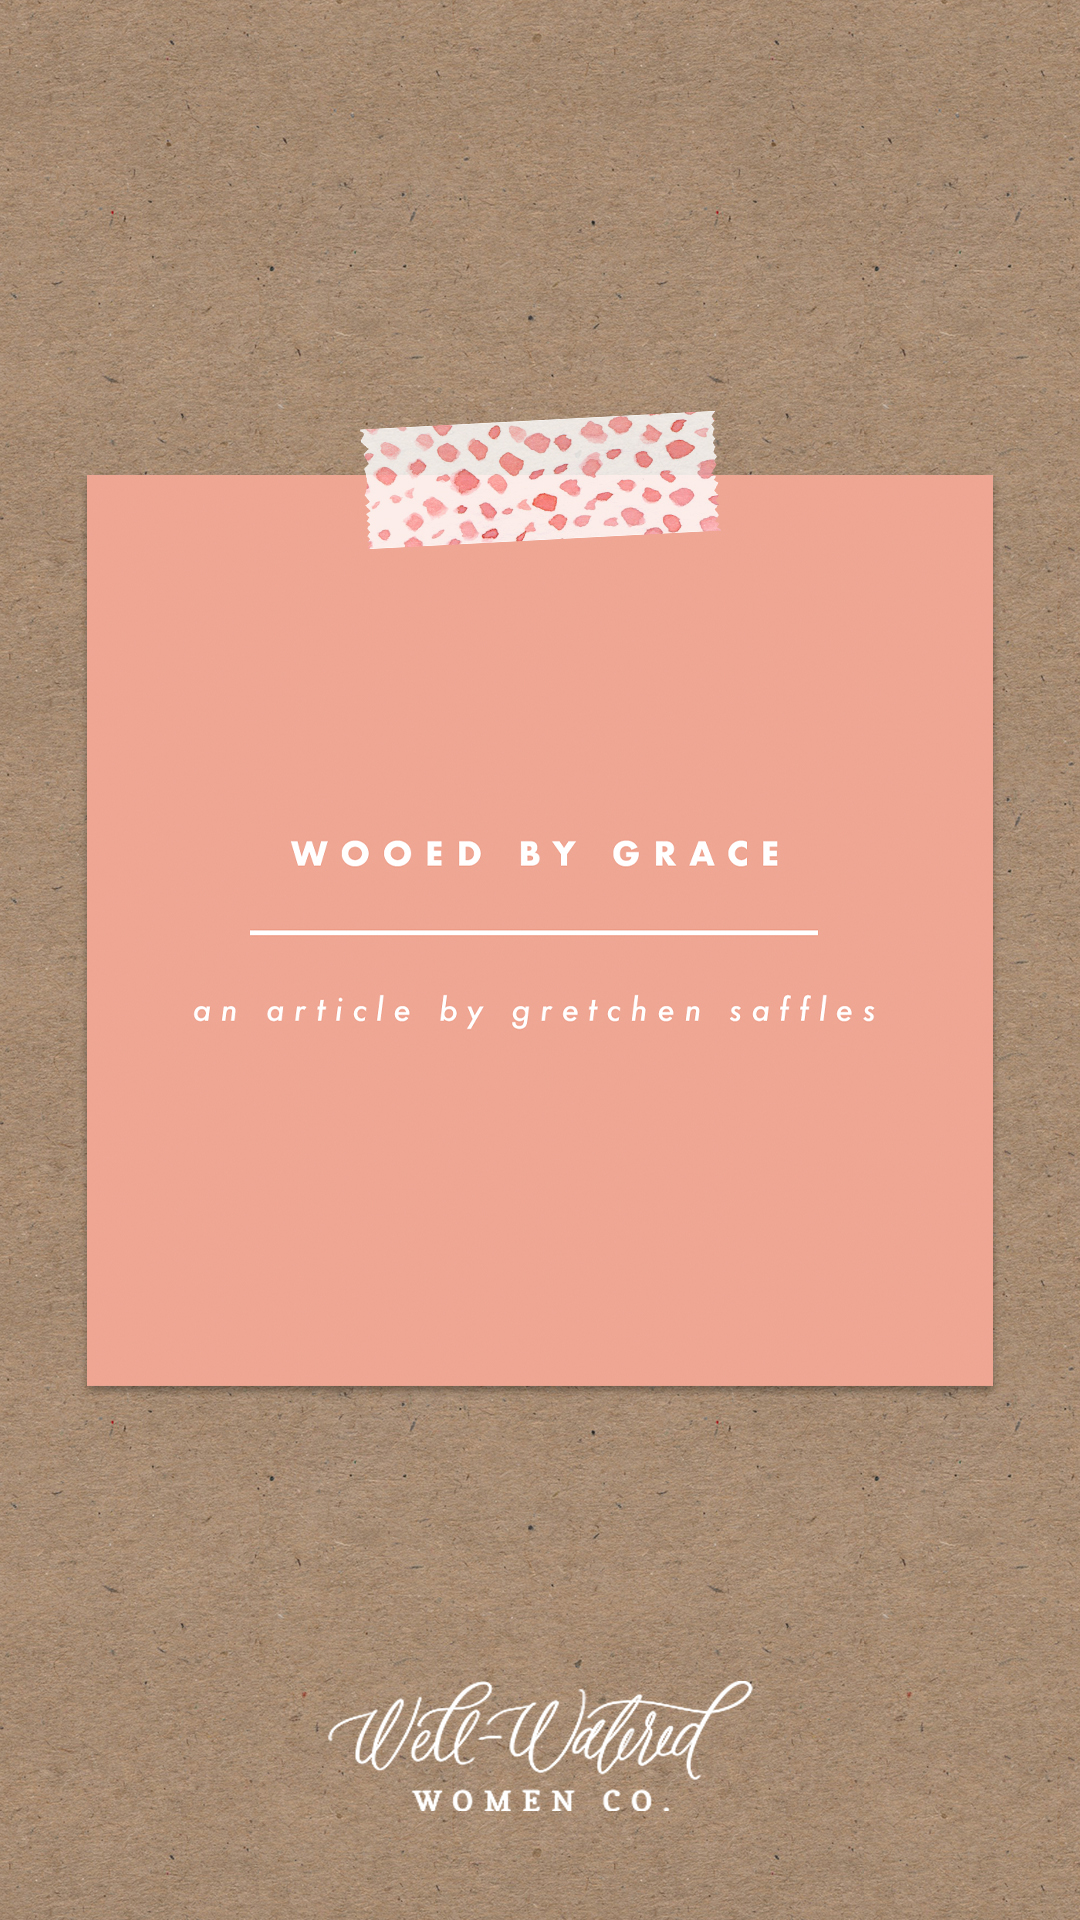 Wooed by God's Grace | Well-Watered Women Articles